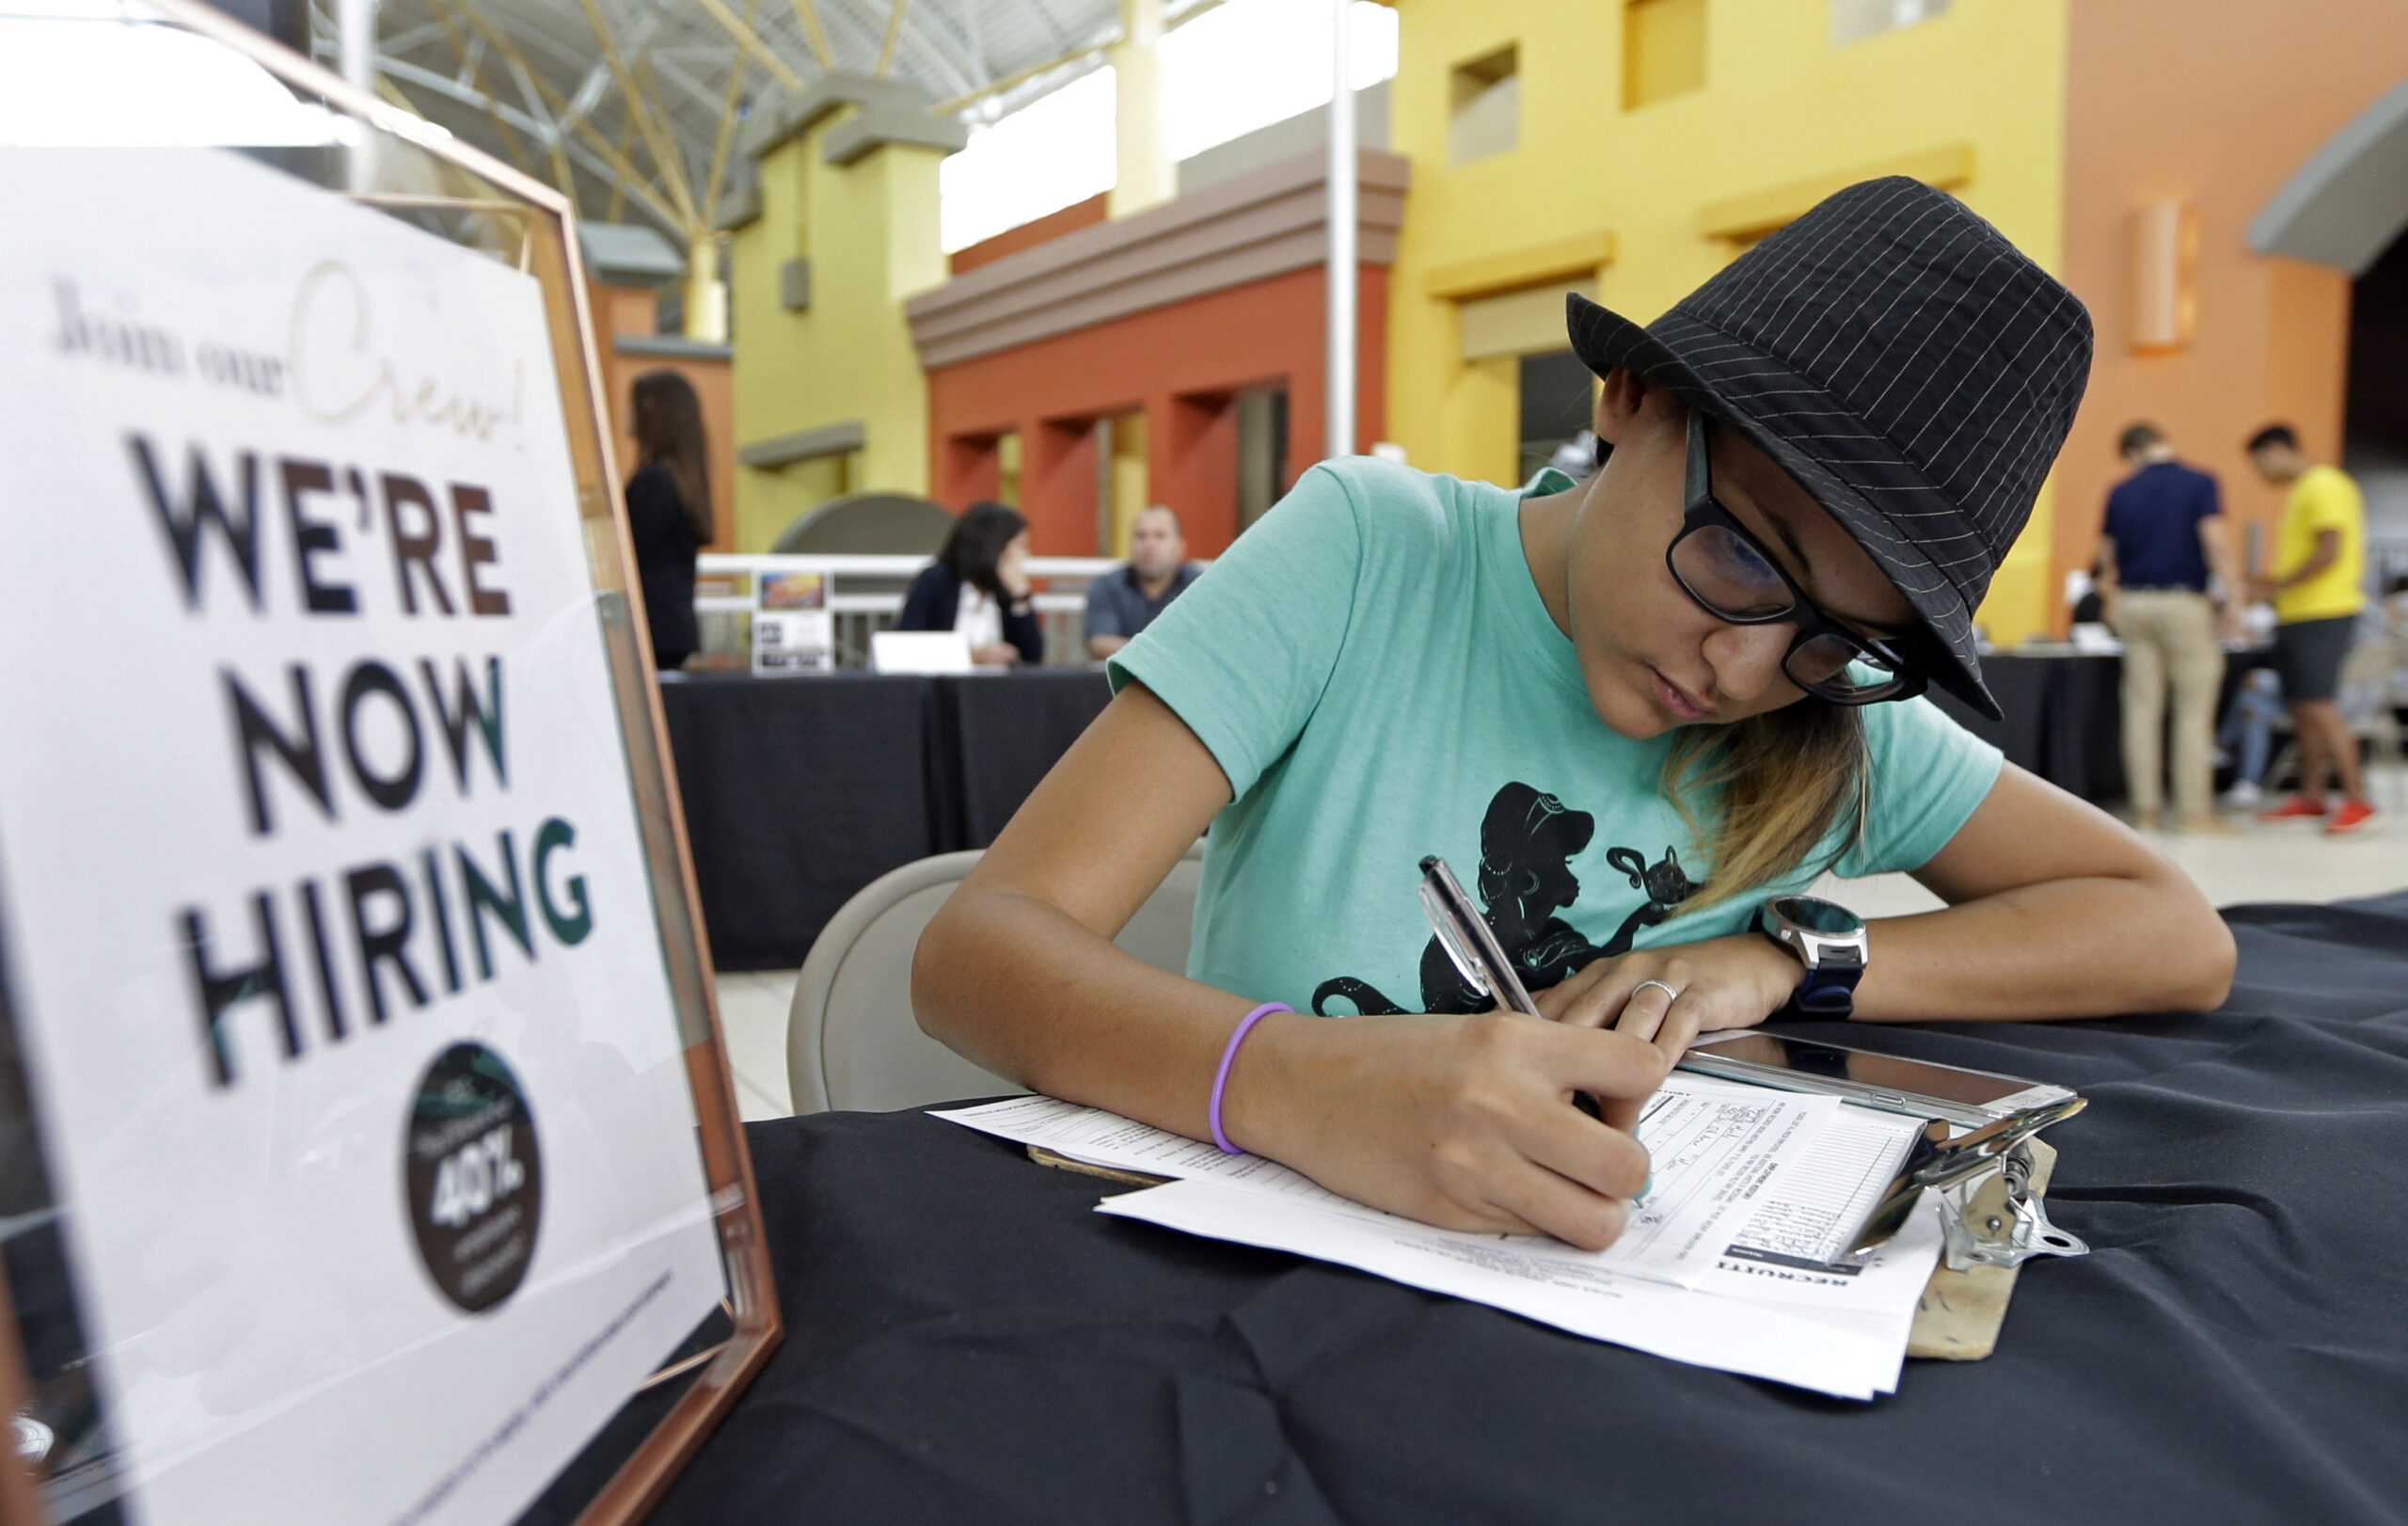 A young woman in a fedora fills out a job application next to a sign that says "We're Now Hiring."